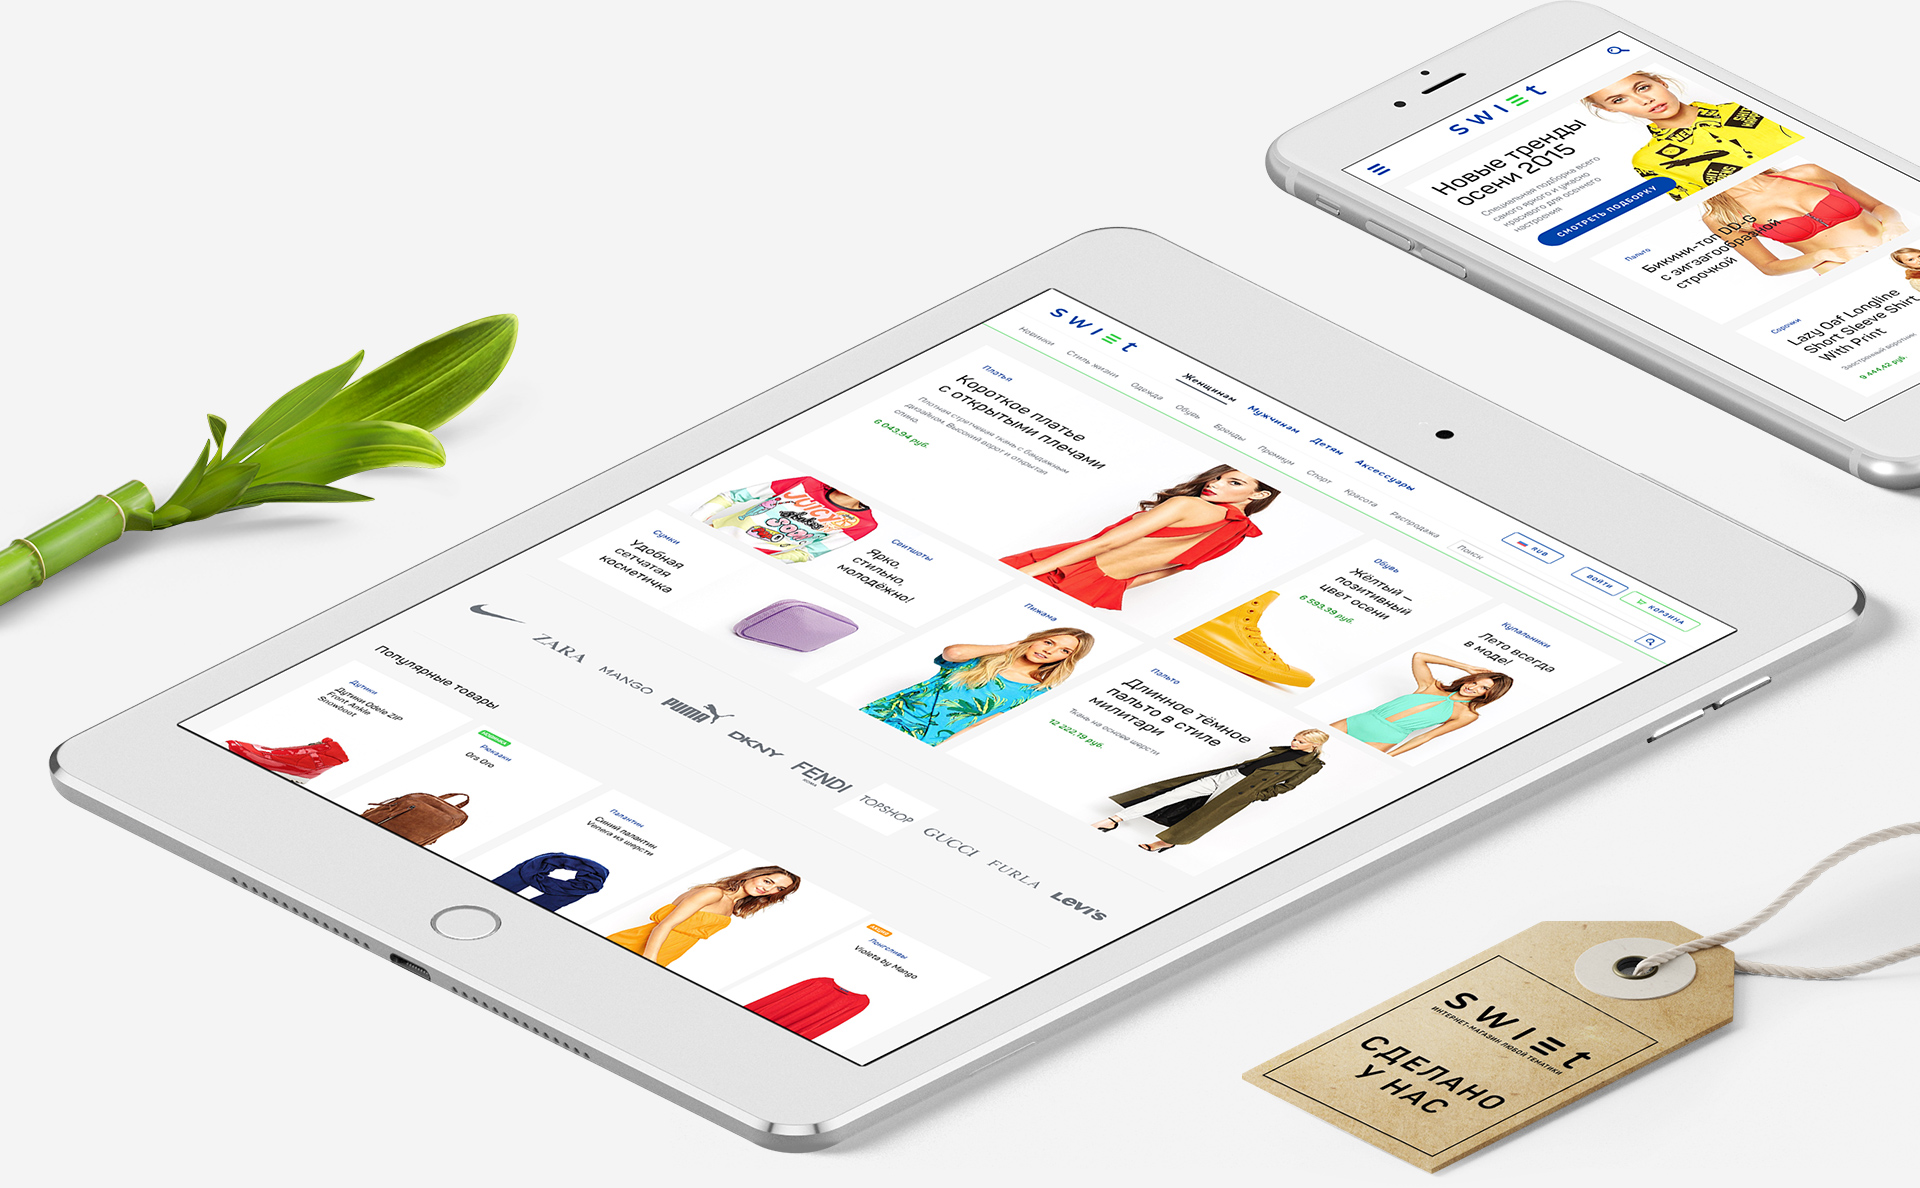 Stylish user interface kit for a real ecommerce project